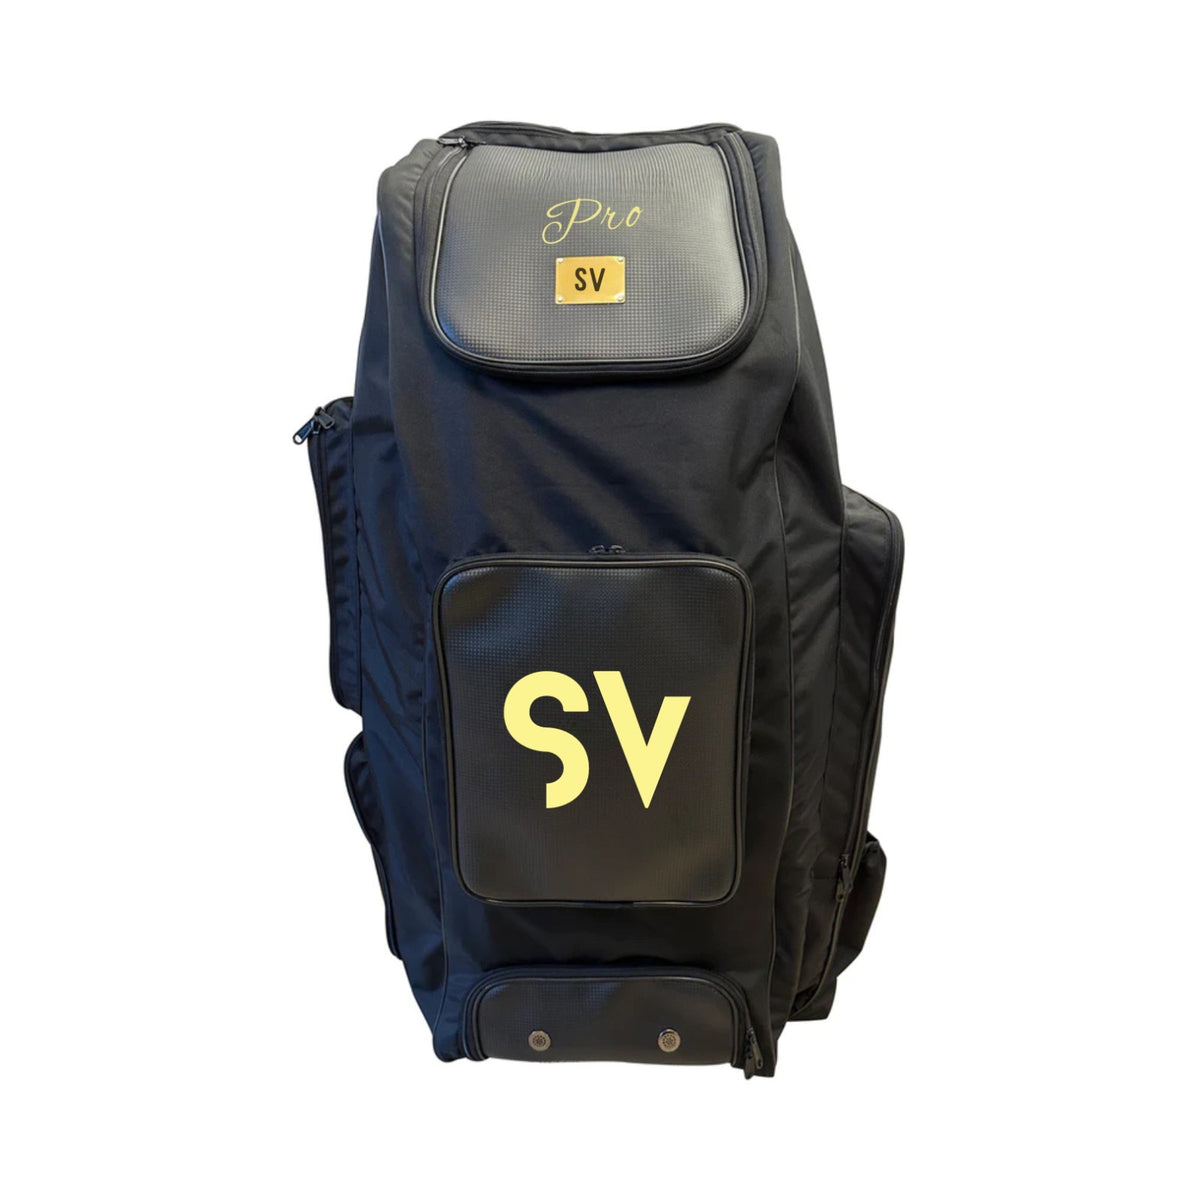 Shopping Valley(SV) Pro EDITION CRICKET DUFFLE BAG WITH WHEELS